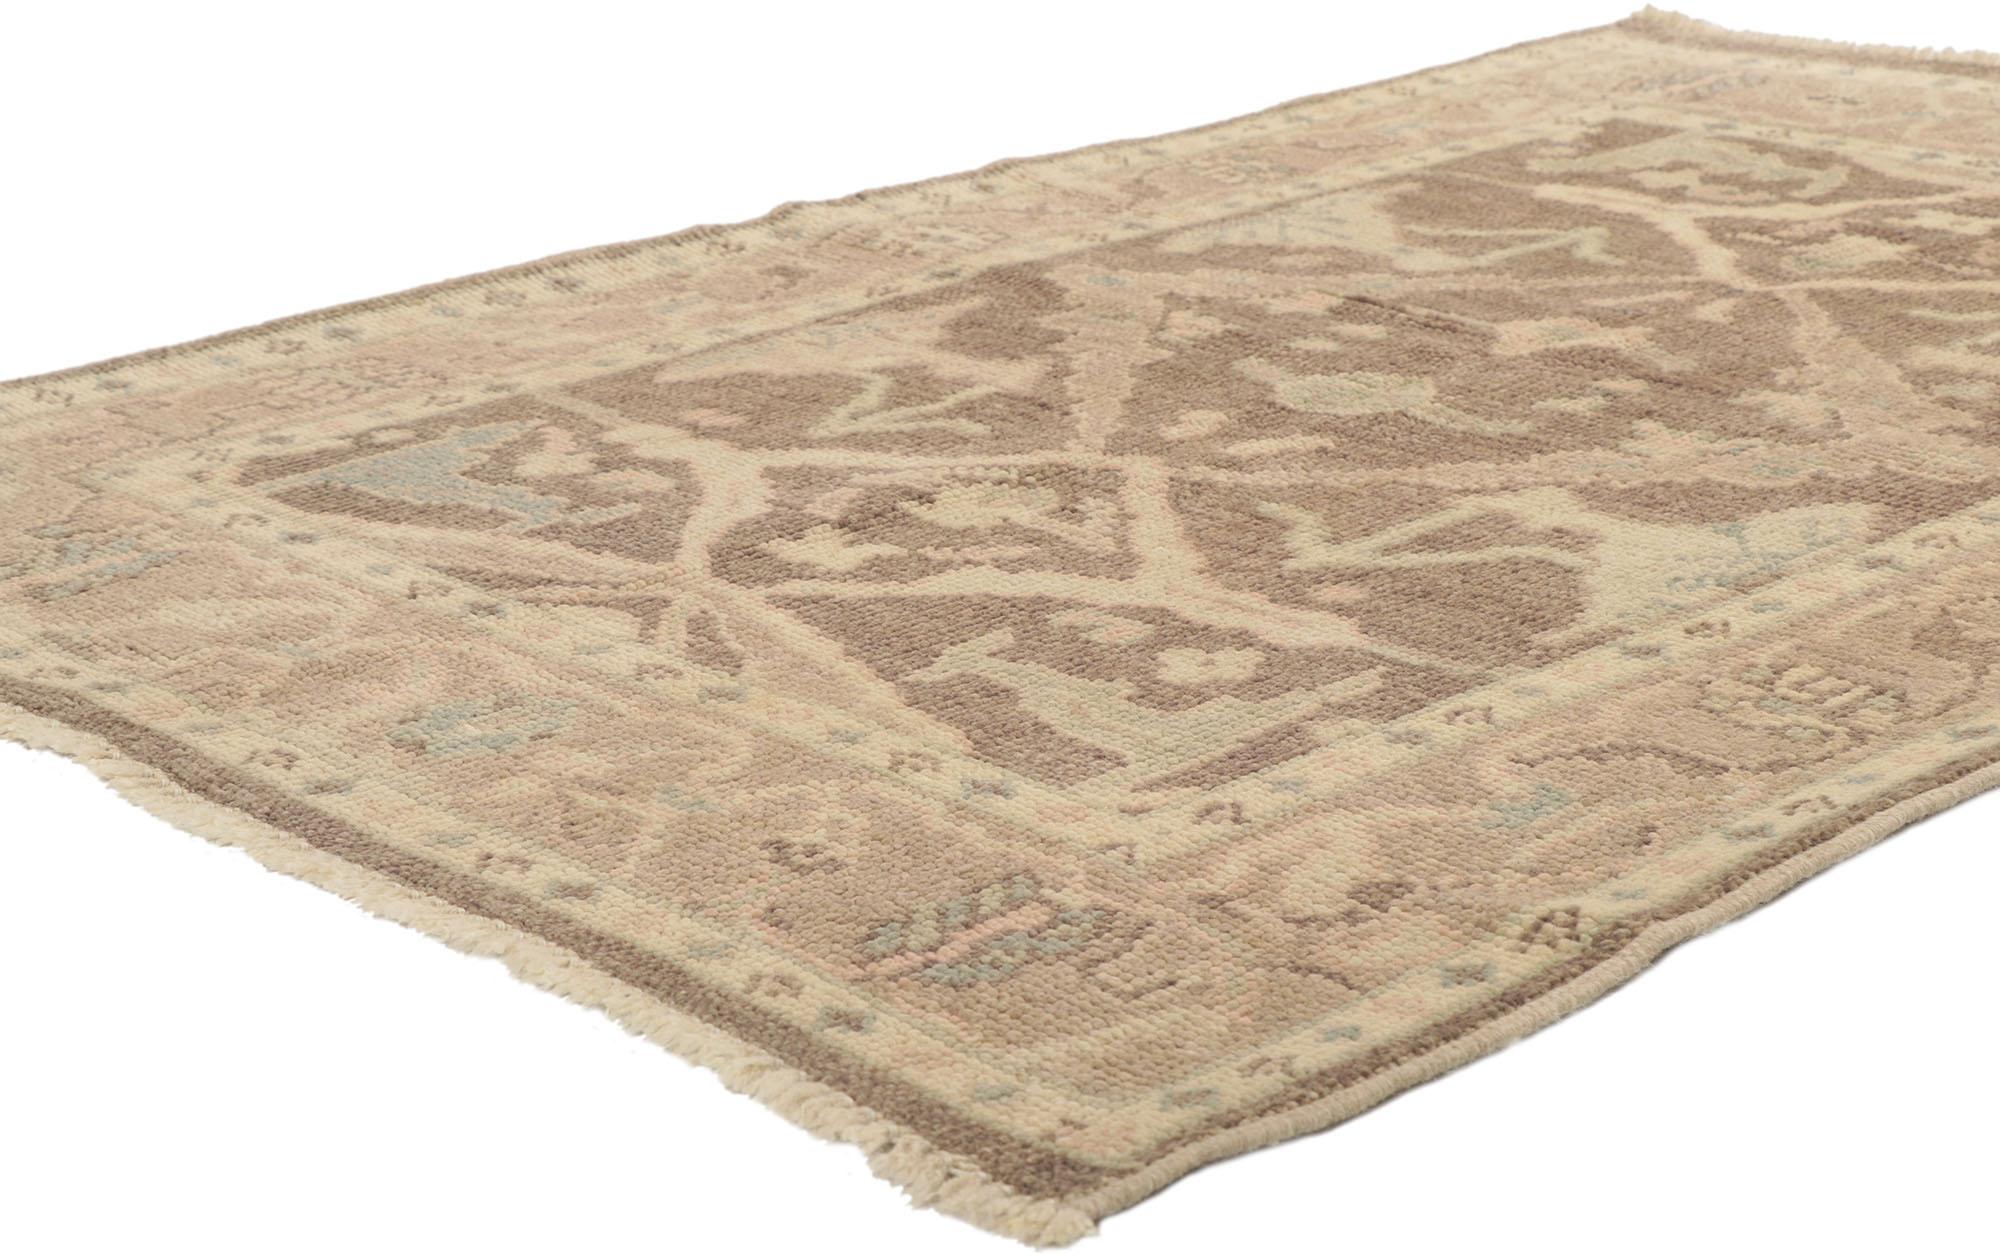 80685 new contemporary oushak rug with Modern style 04'01 x 06'00. Polished and playful, this hand-knotted wool small Oushak rug beautifully embodies a modern style. The abrashed field features a botanical pattern composed of amorphous organic